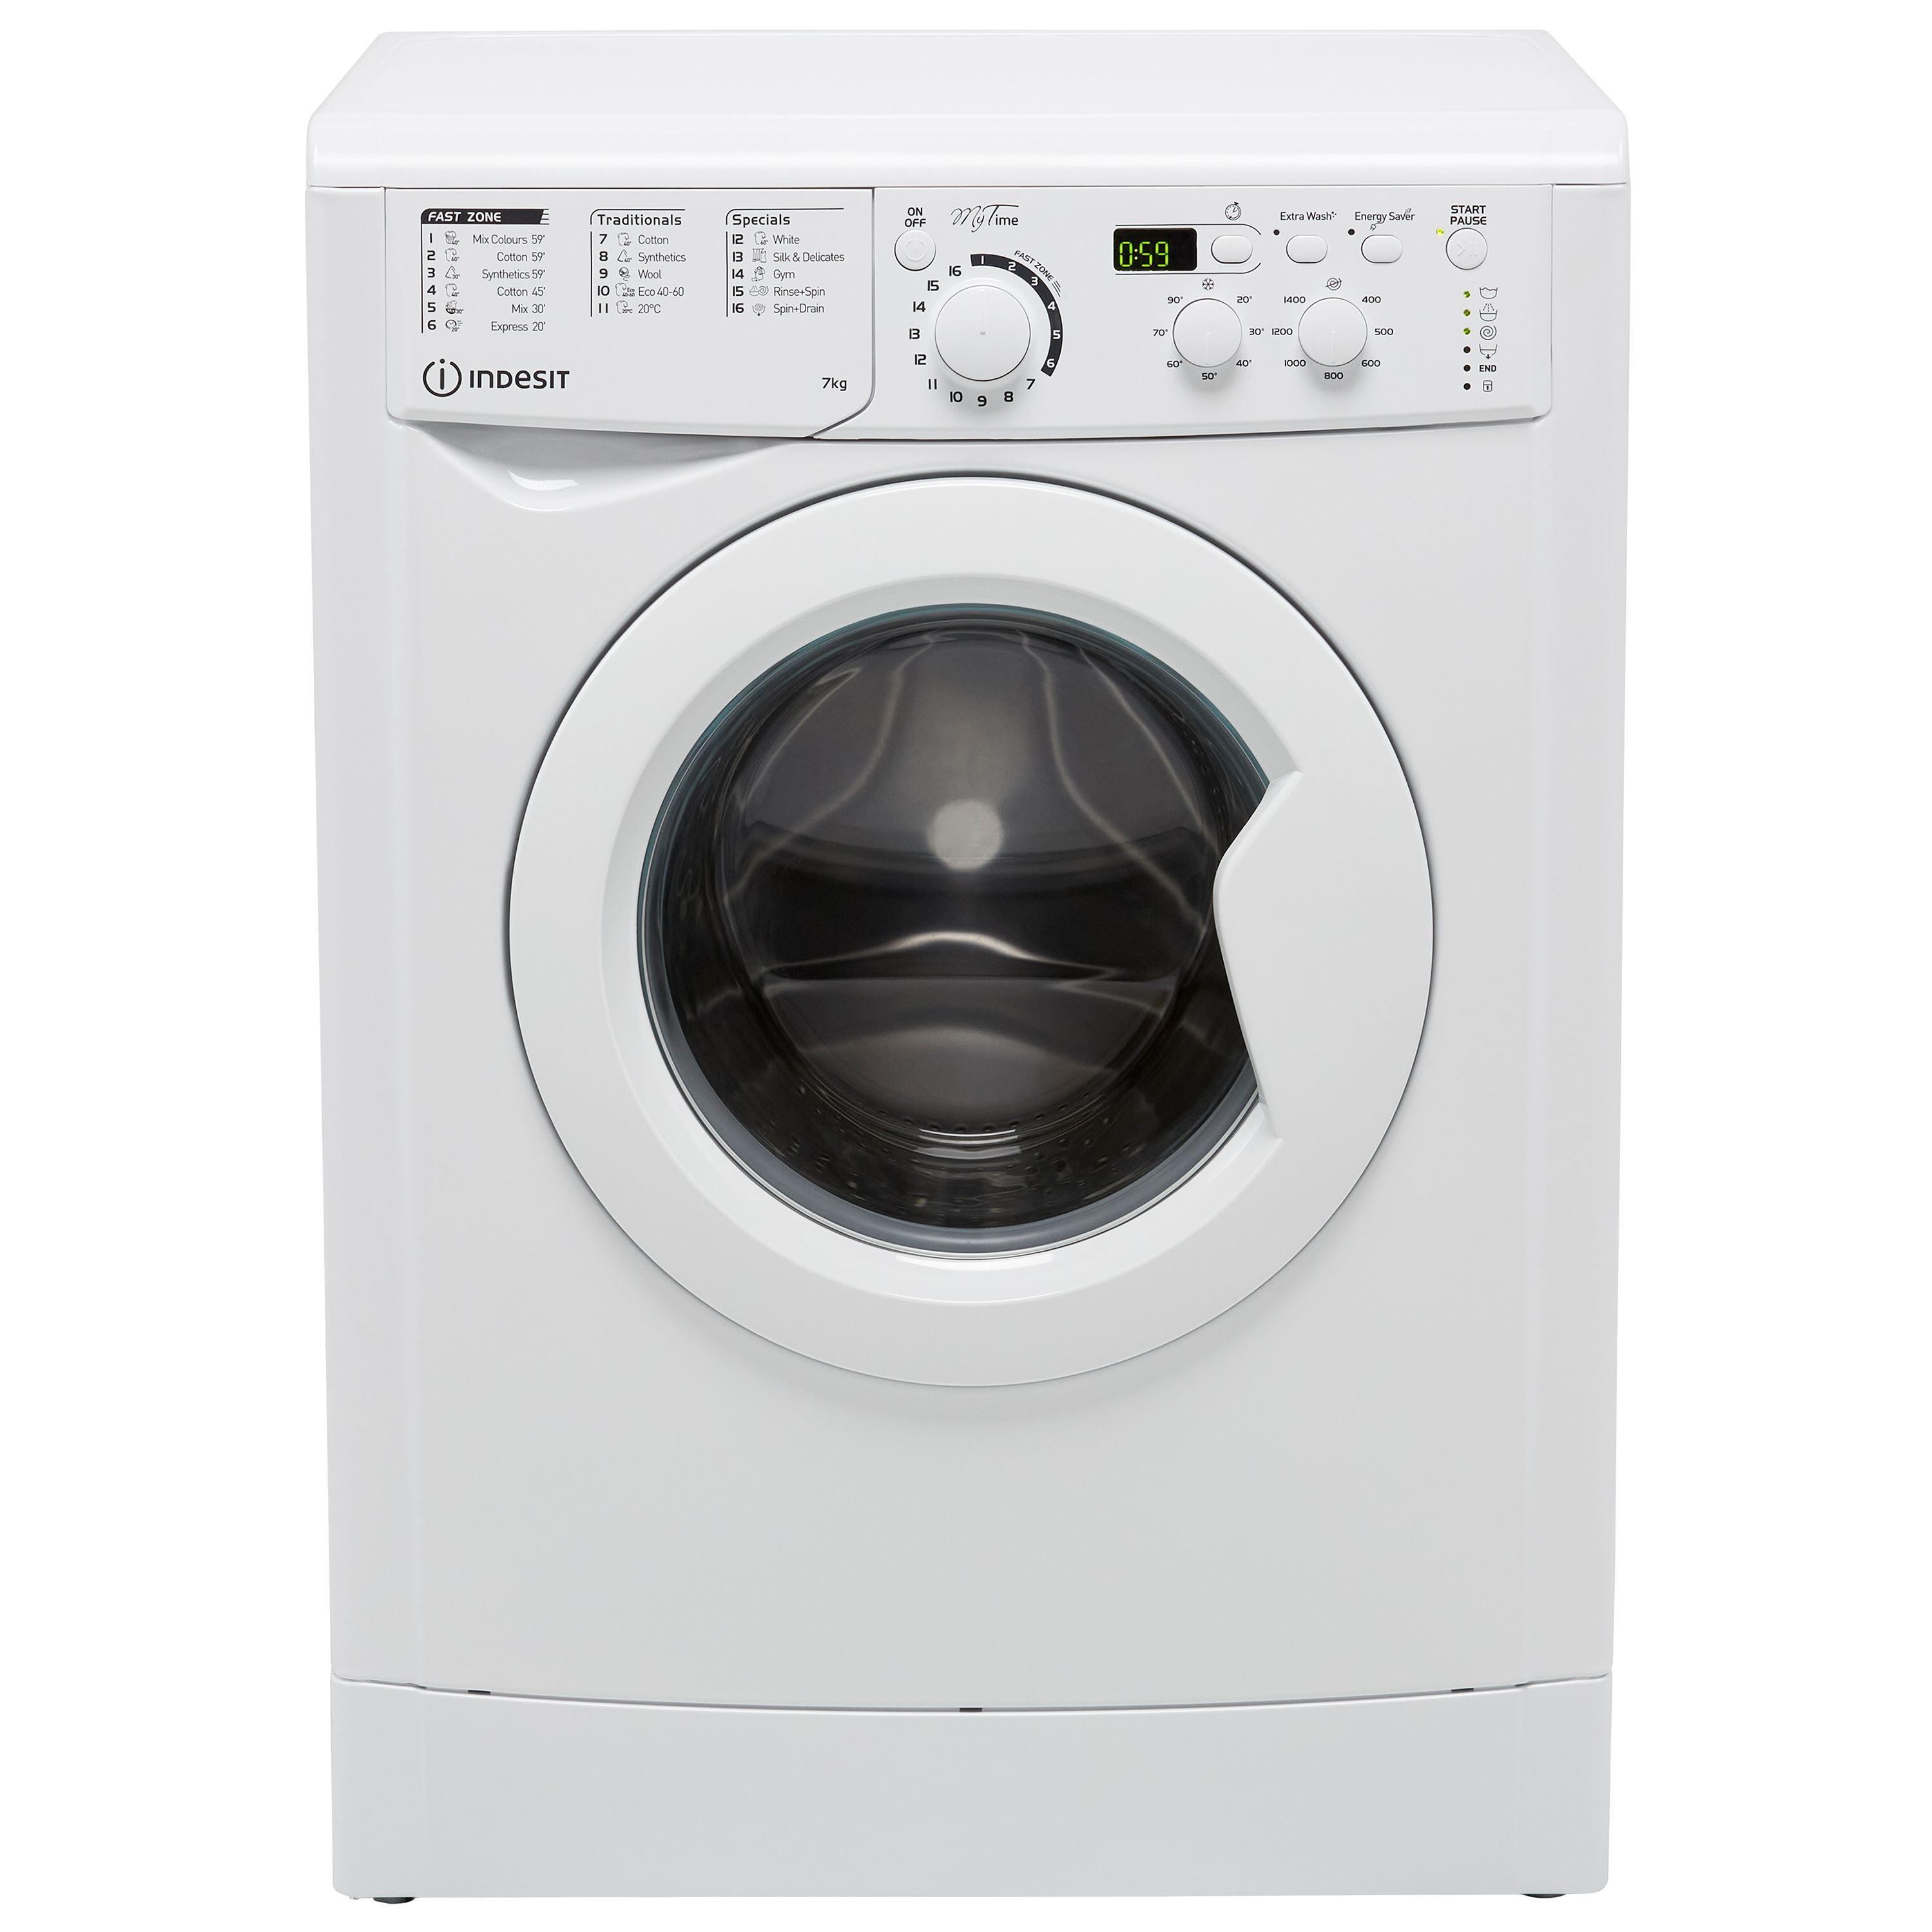 Indesit My Time EWD71453WUKN 7kg Washing Machine with 1400 rpm - White - D Rated, White